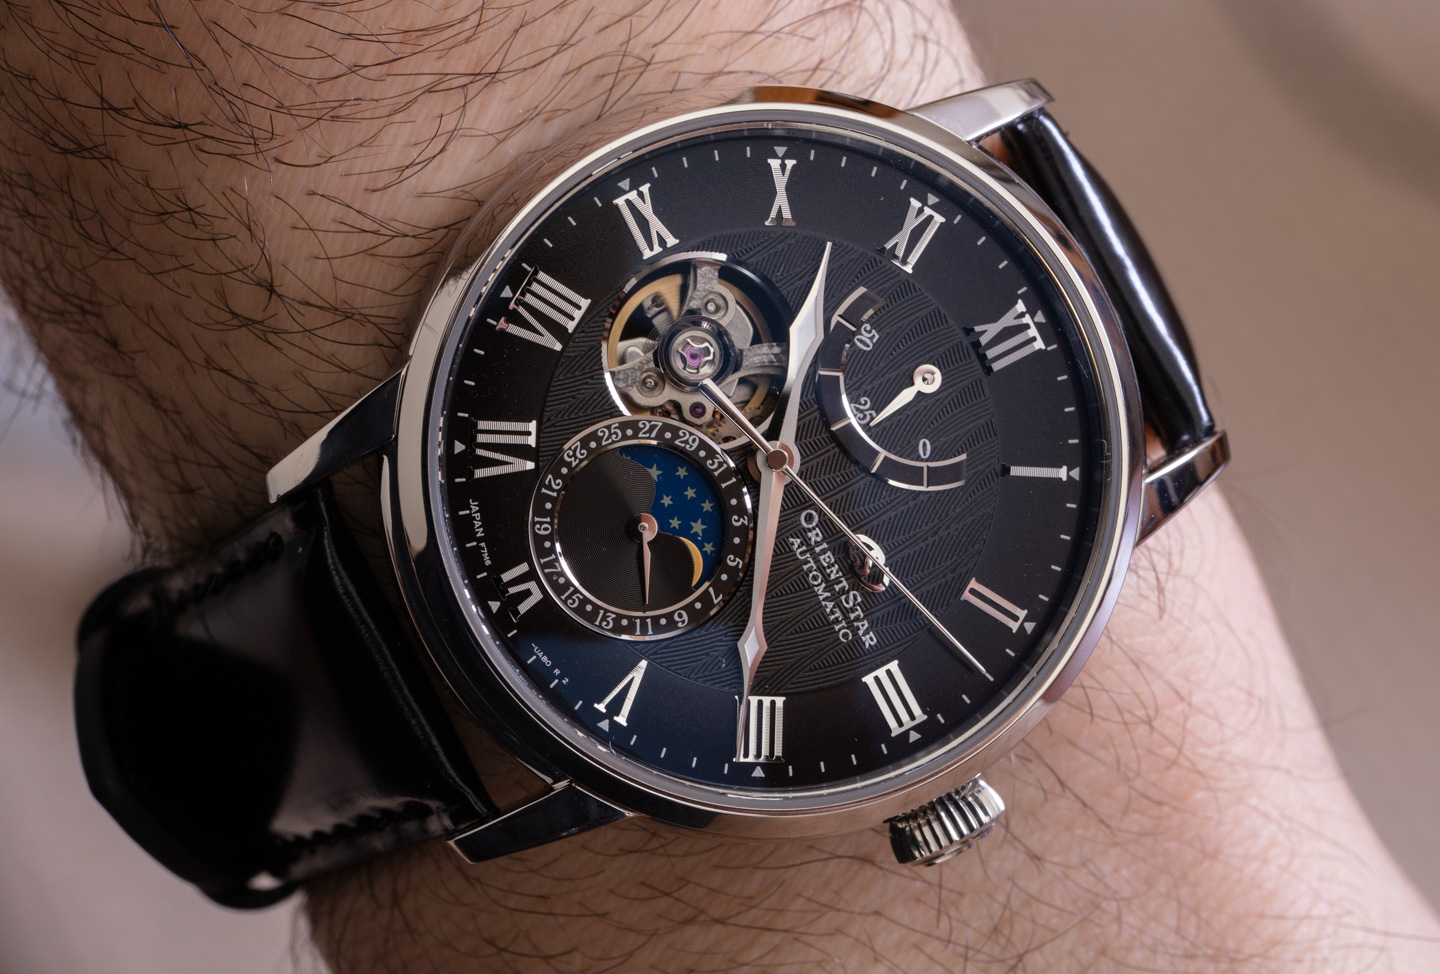 Watch Review: Orient Star Mechanical Classic RE-AY0107N | aBlogtoWatch